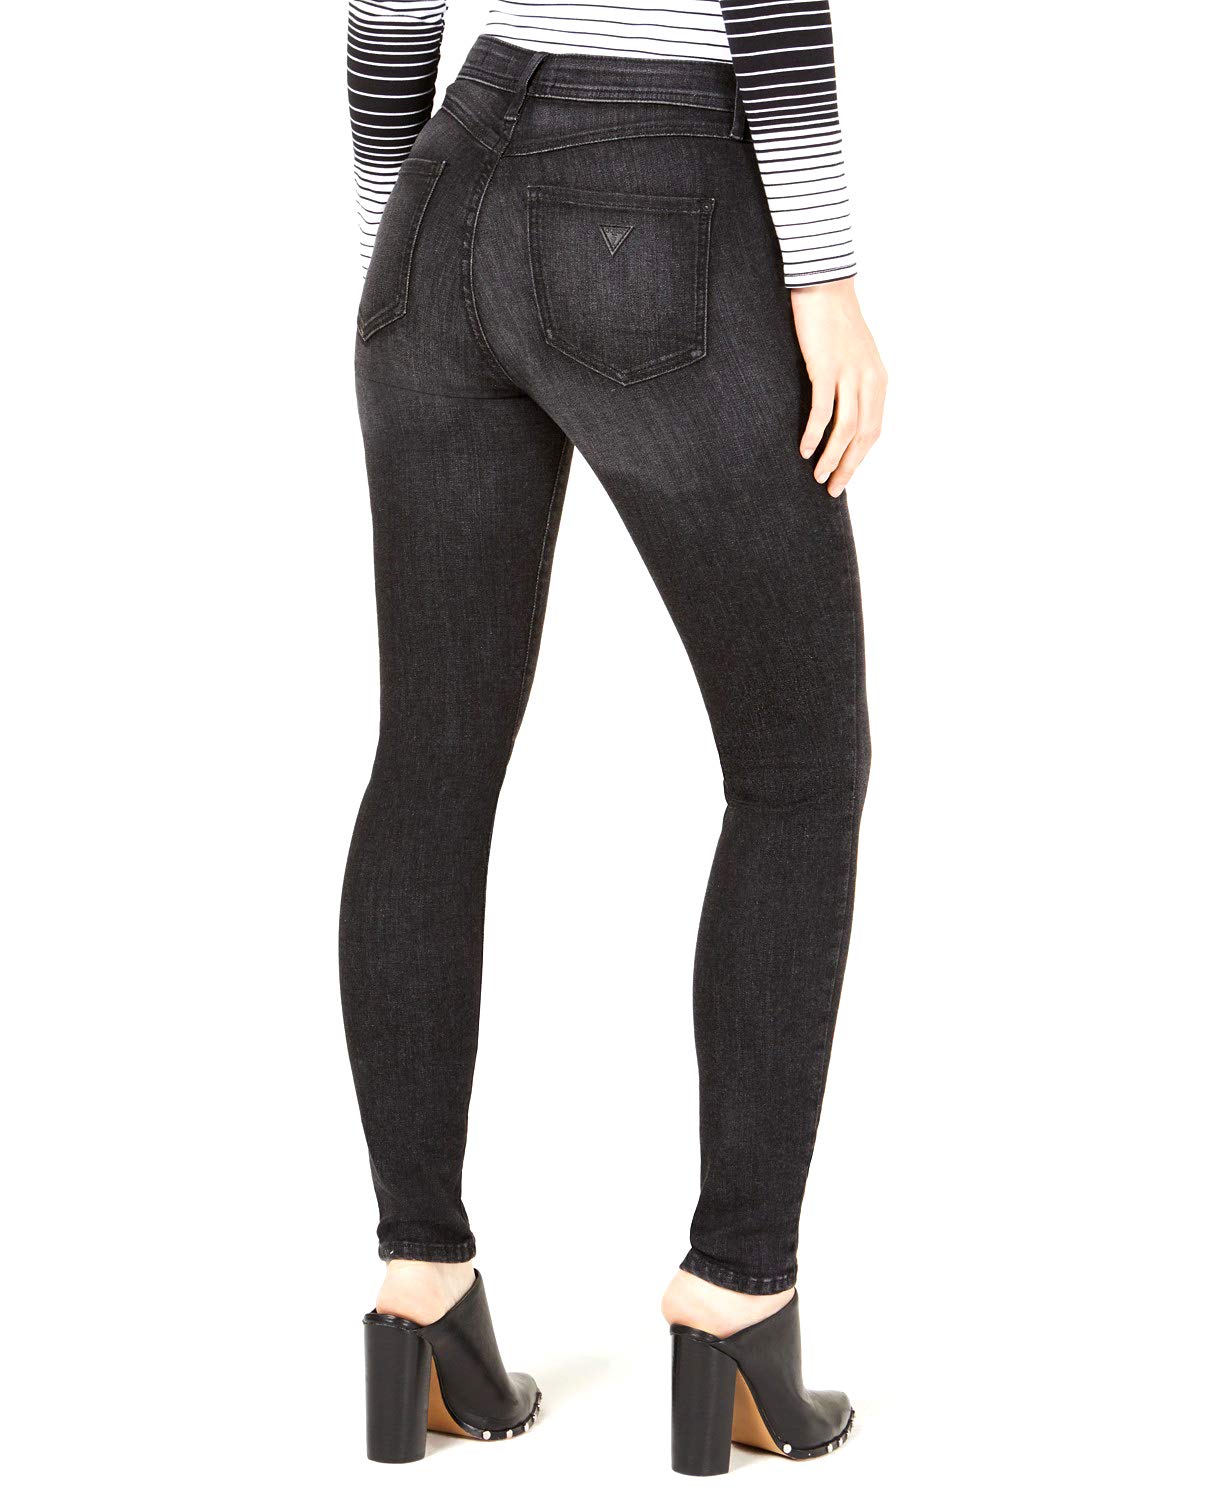 GUESS Womens Chevron 1981 Skinny Fit Jeans